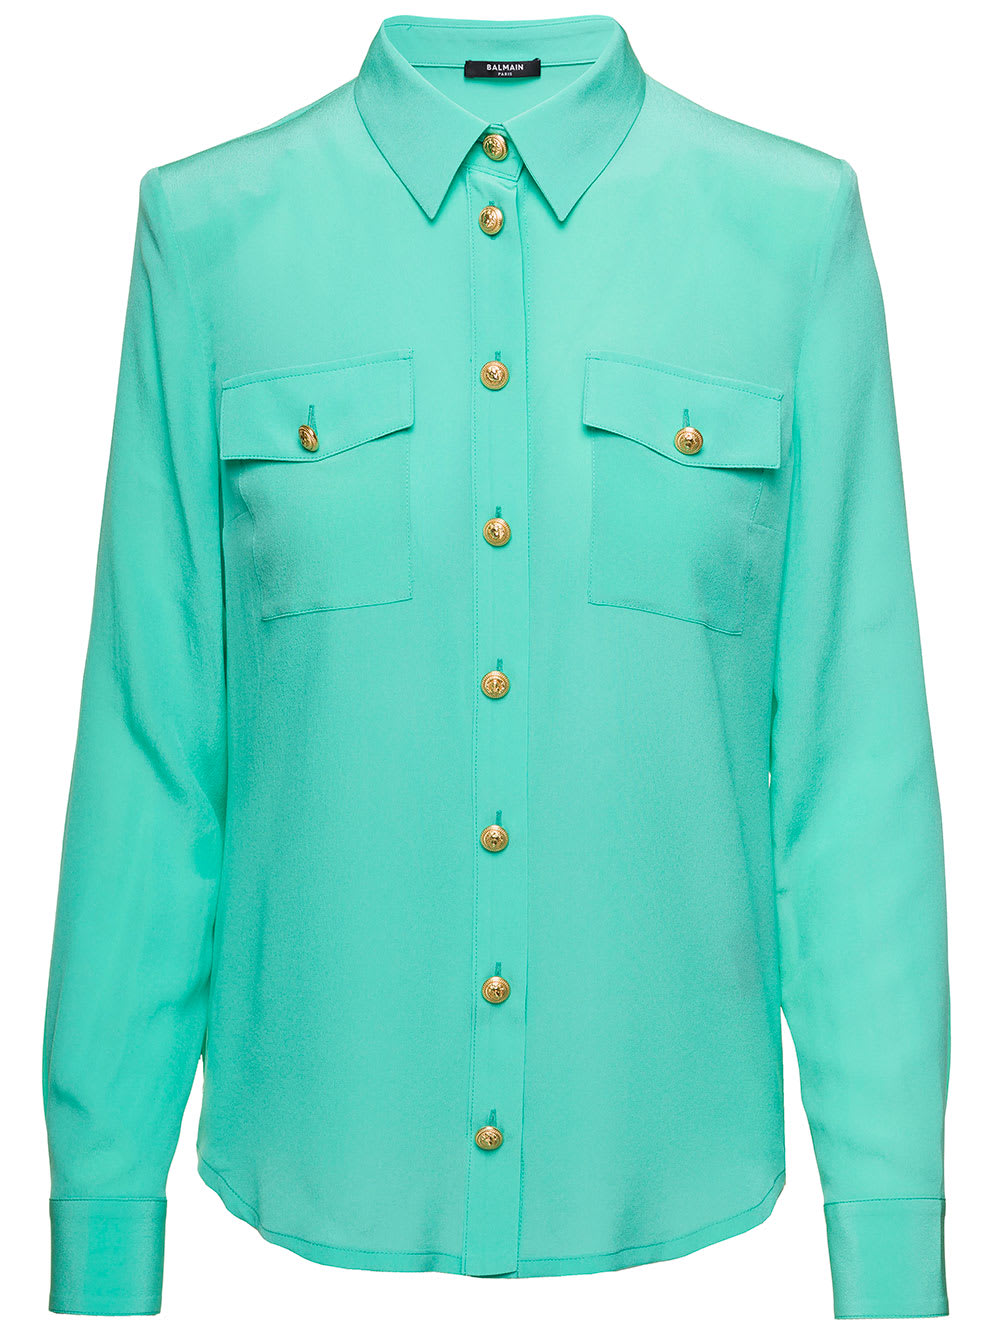 Balmain Light Blue Shirt With Jewel Buttons And Pockets In Crepe De Chine Woman